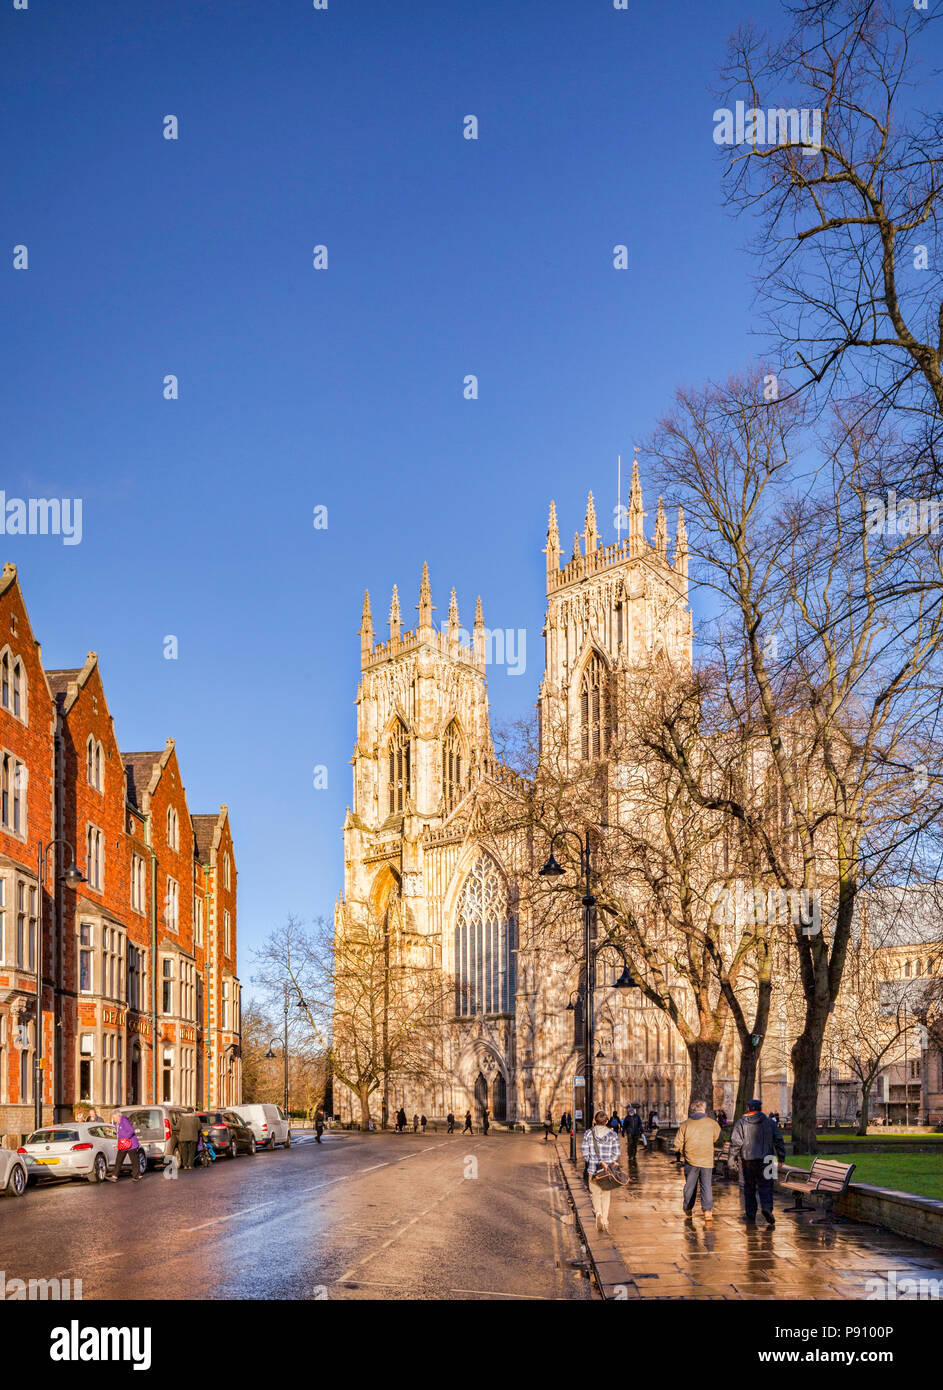 The West facade of York Minster, seen in winter from Duncombe Place after a shower. Stock Photo